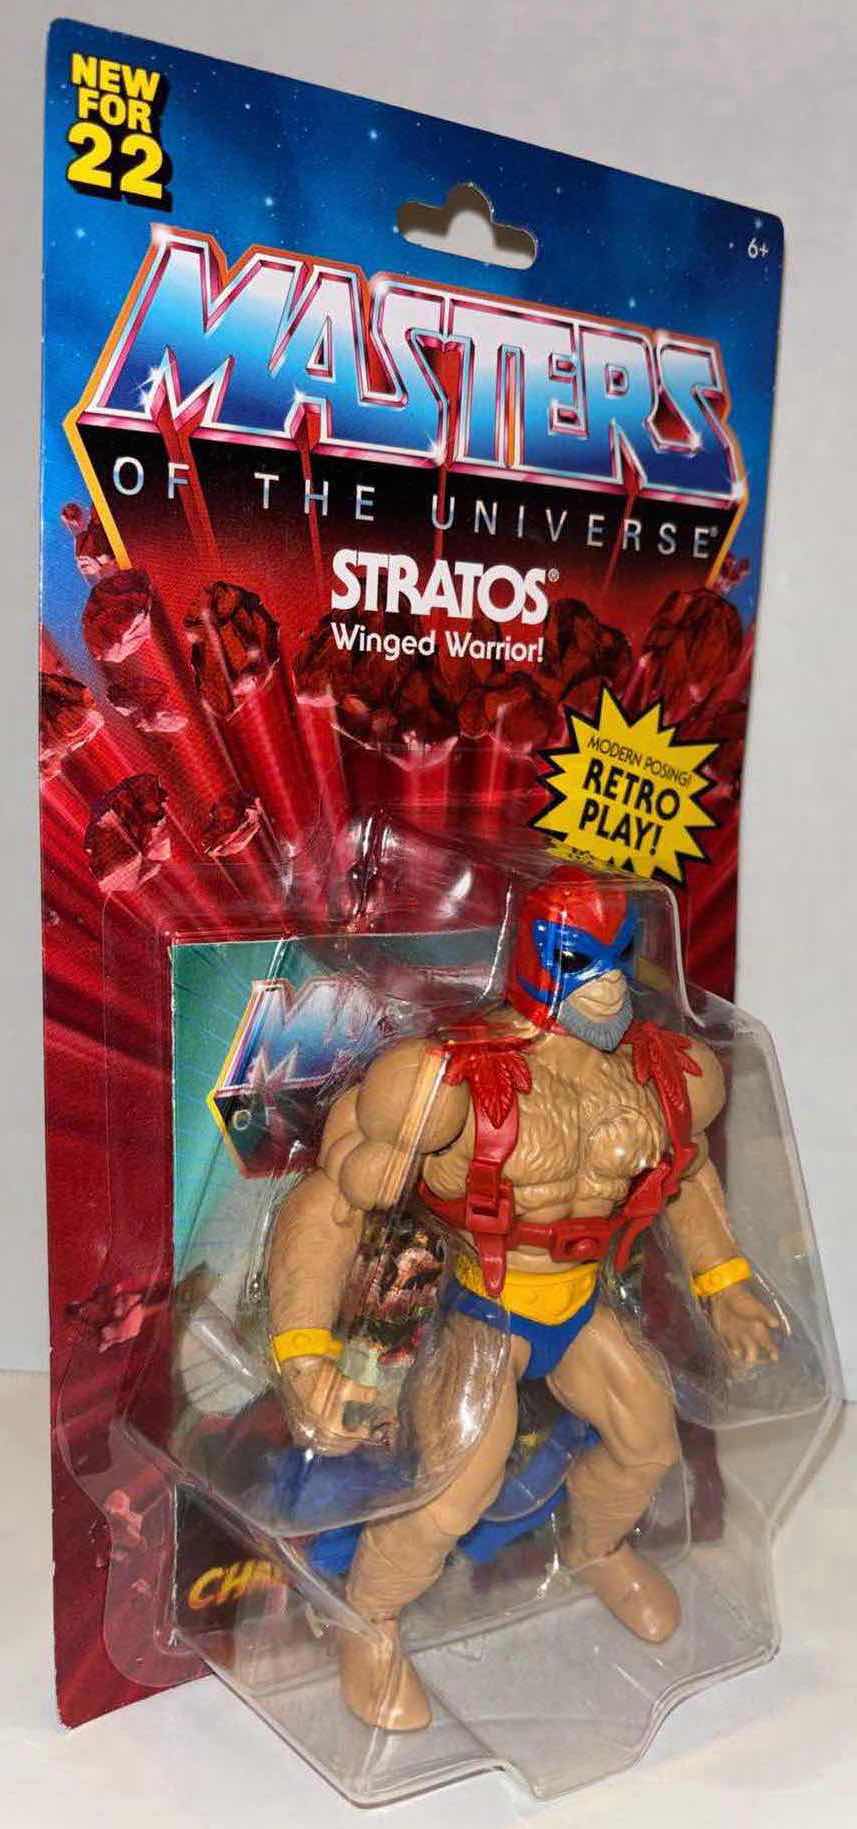 Photo 1 of NEW MATTEL MASTERS OF THE UNIVERSE “STRATOS” ACTION FIGURE & ACCESSORIES (1)